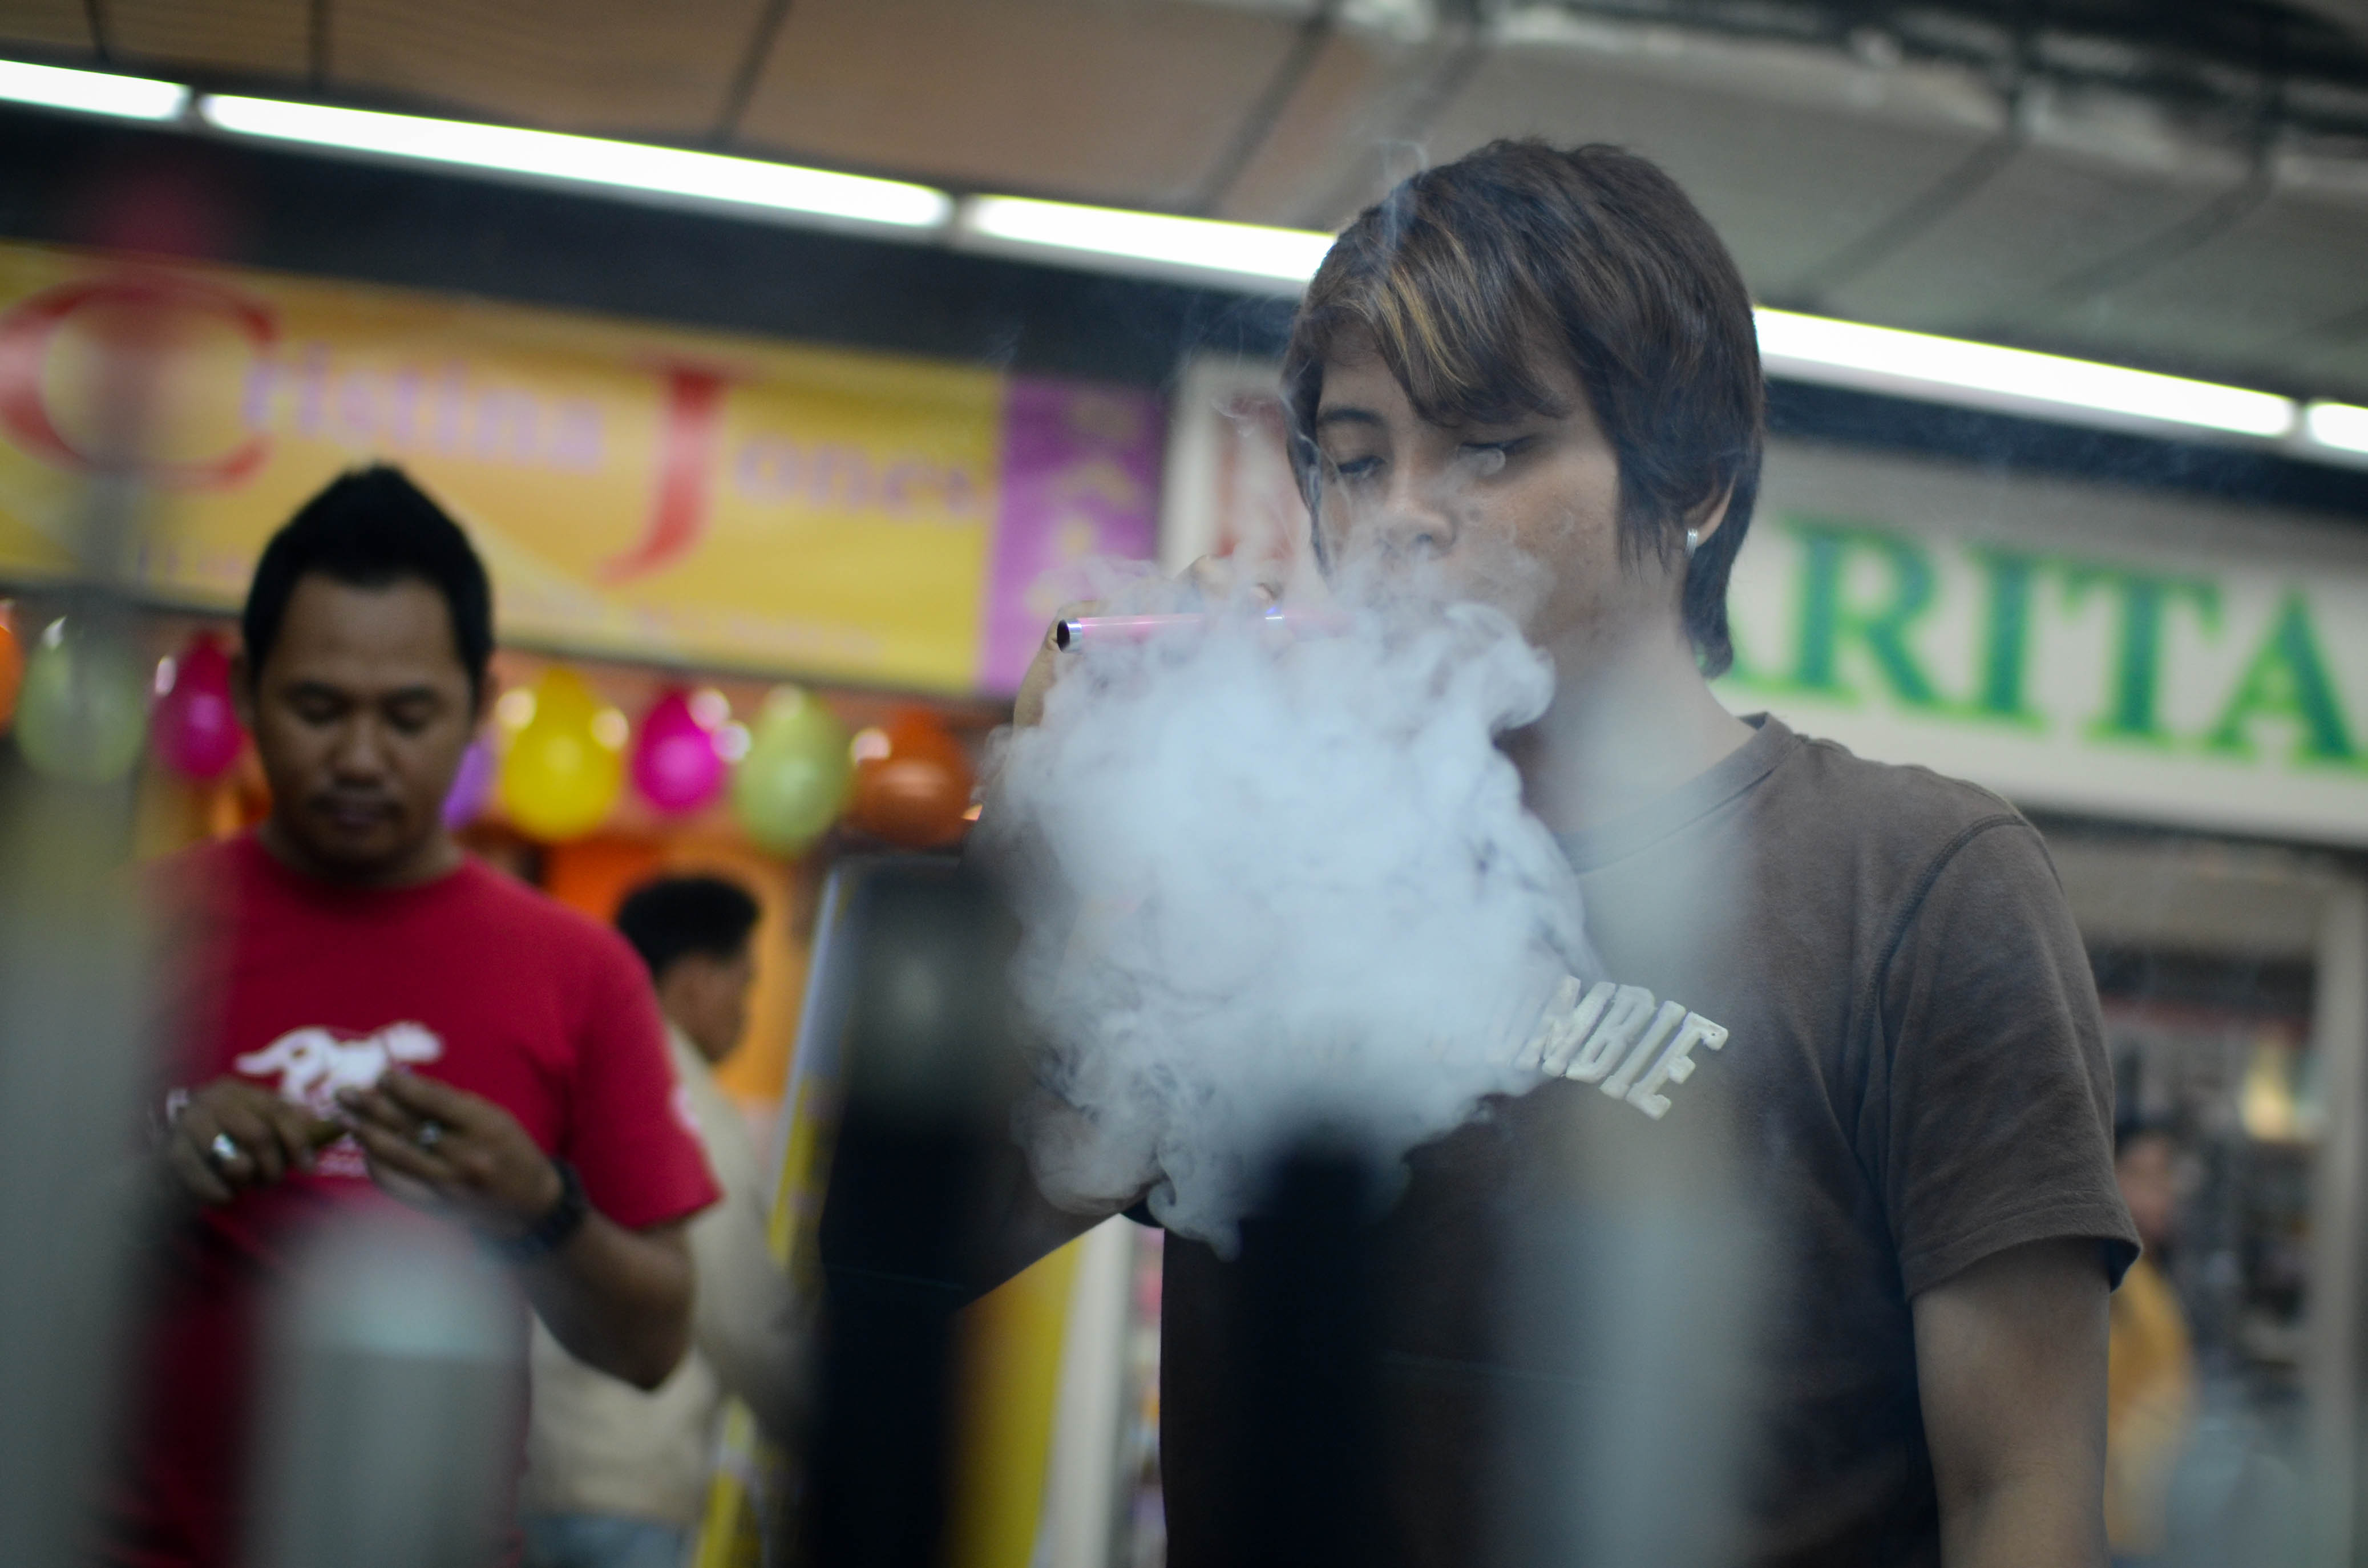 Consumers smoke electronic cigarettes at a mall on June 30, 2013 in Manila, Philippines. (Dondi Tawatao—Getty Images)